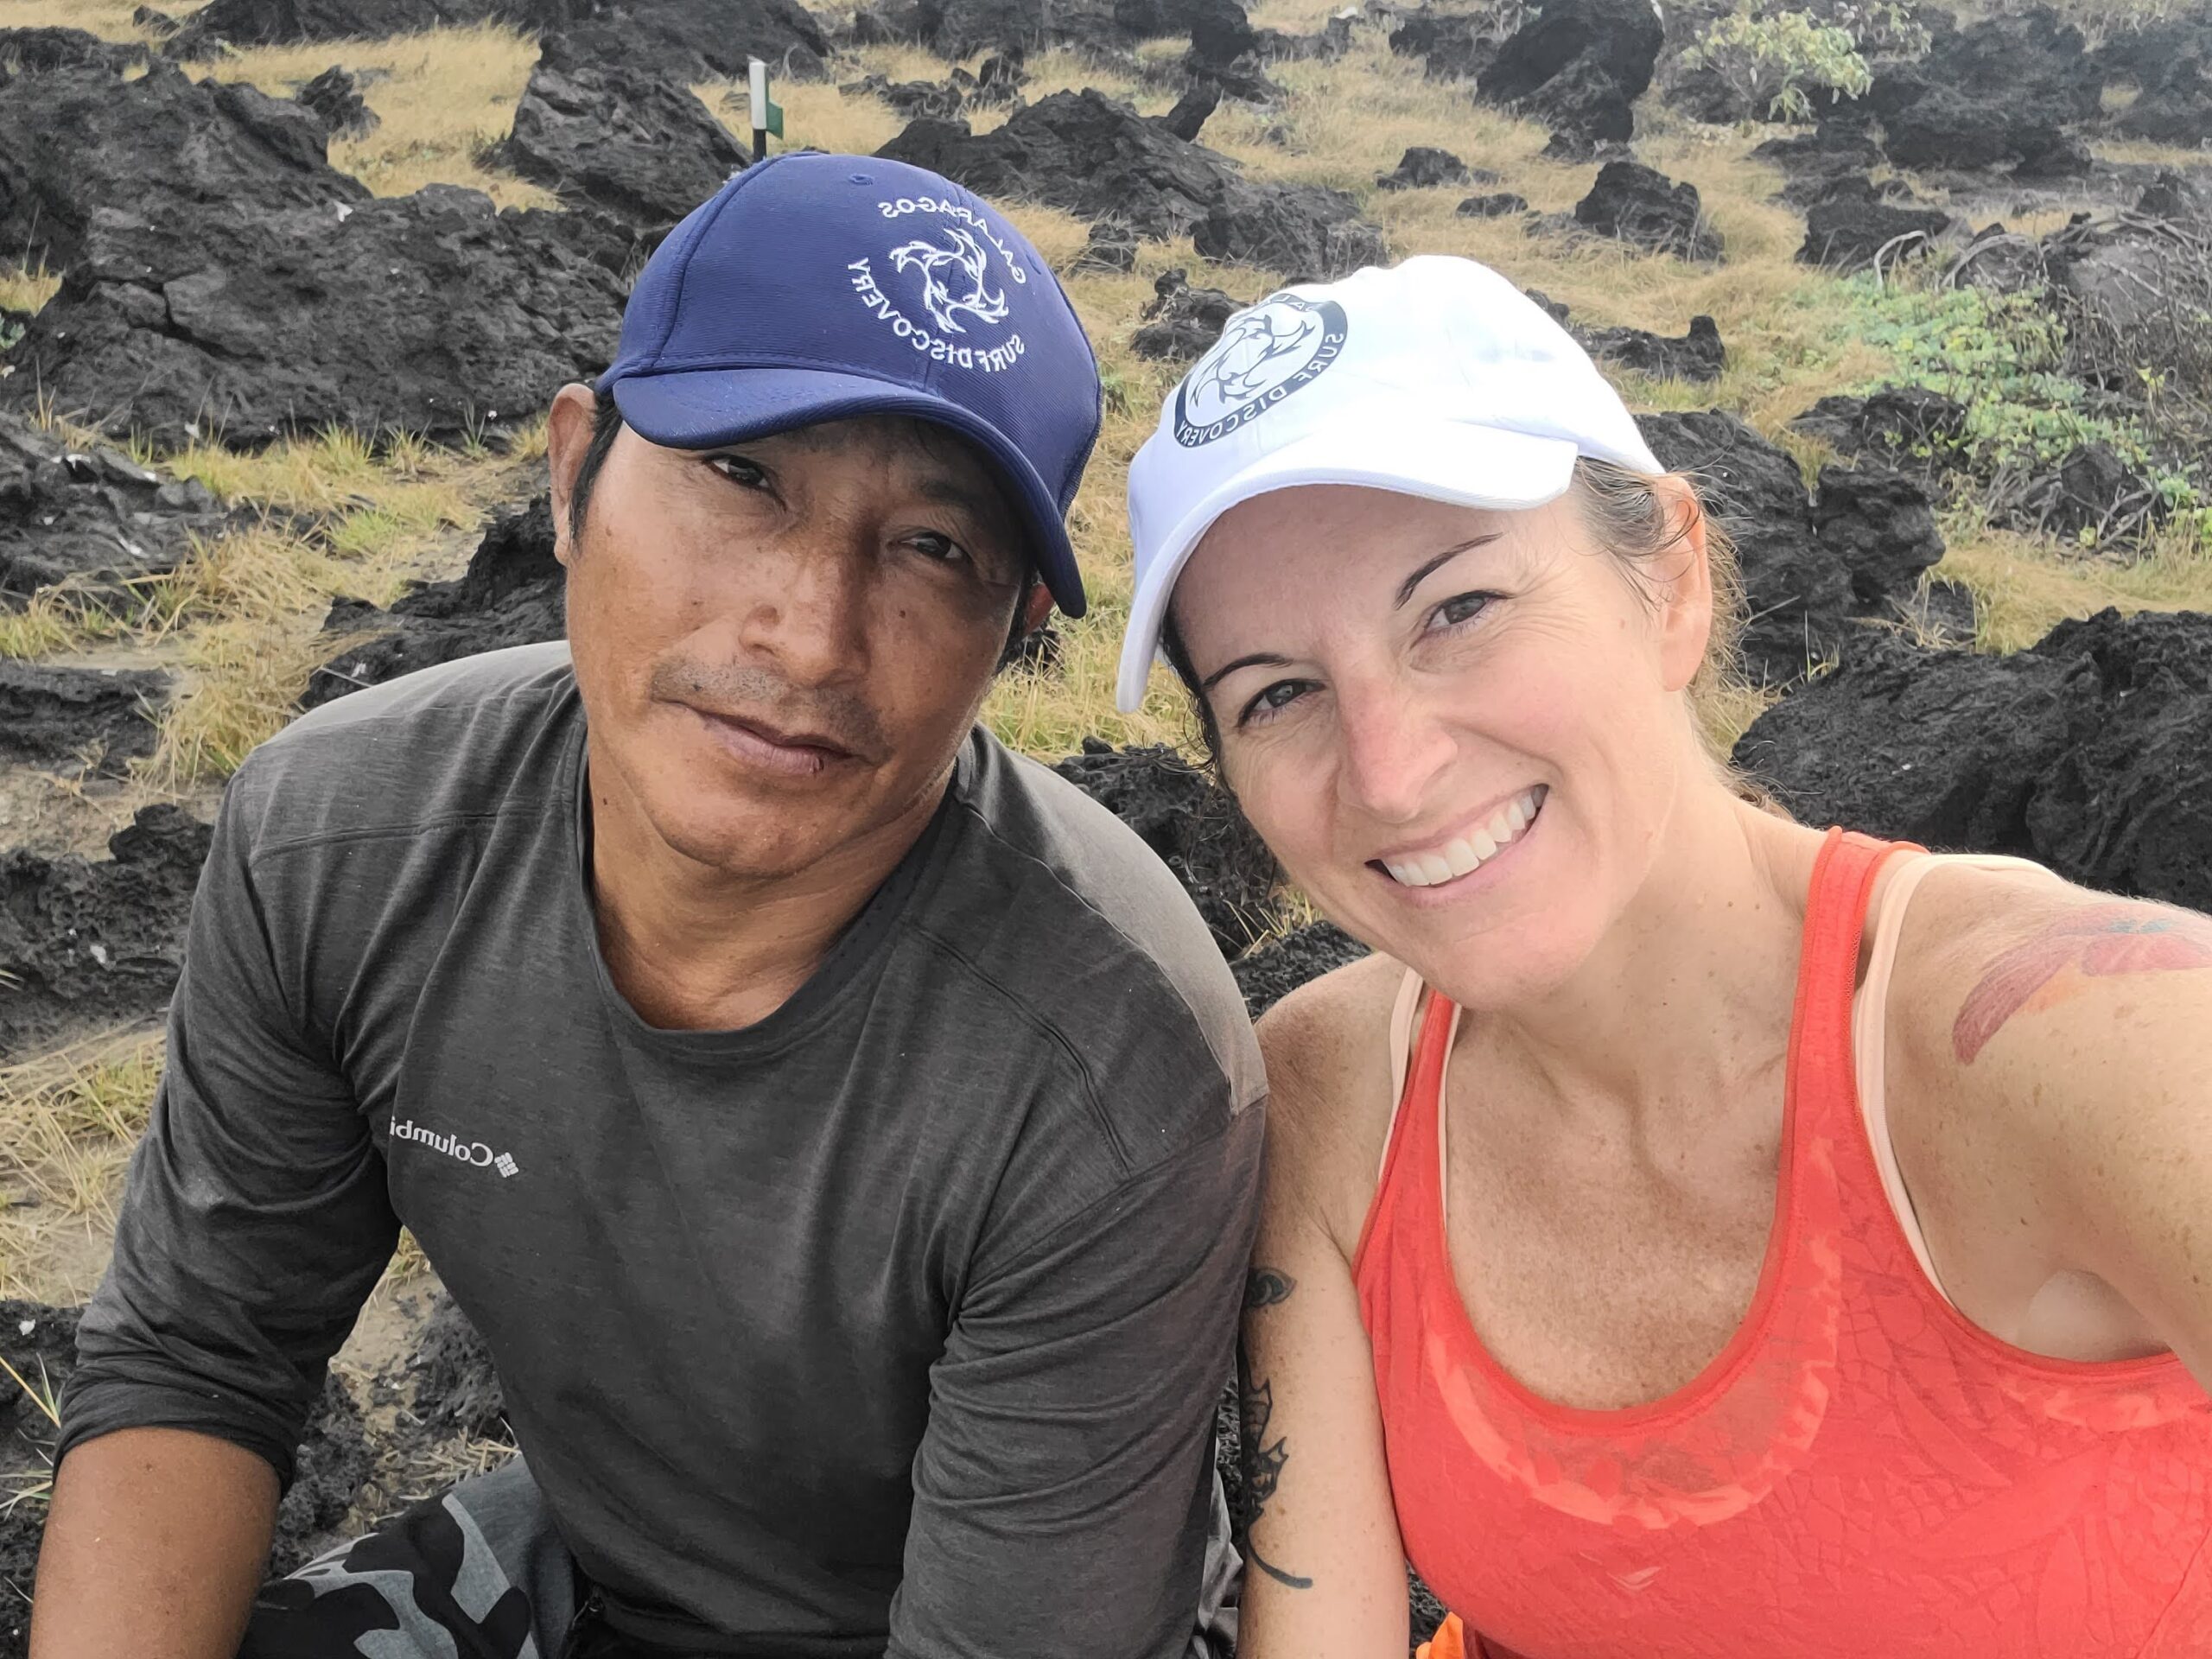 man and woman wearing galapagos surf discovery hats